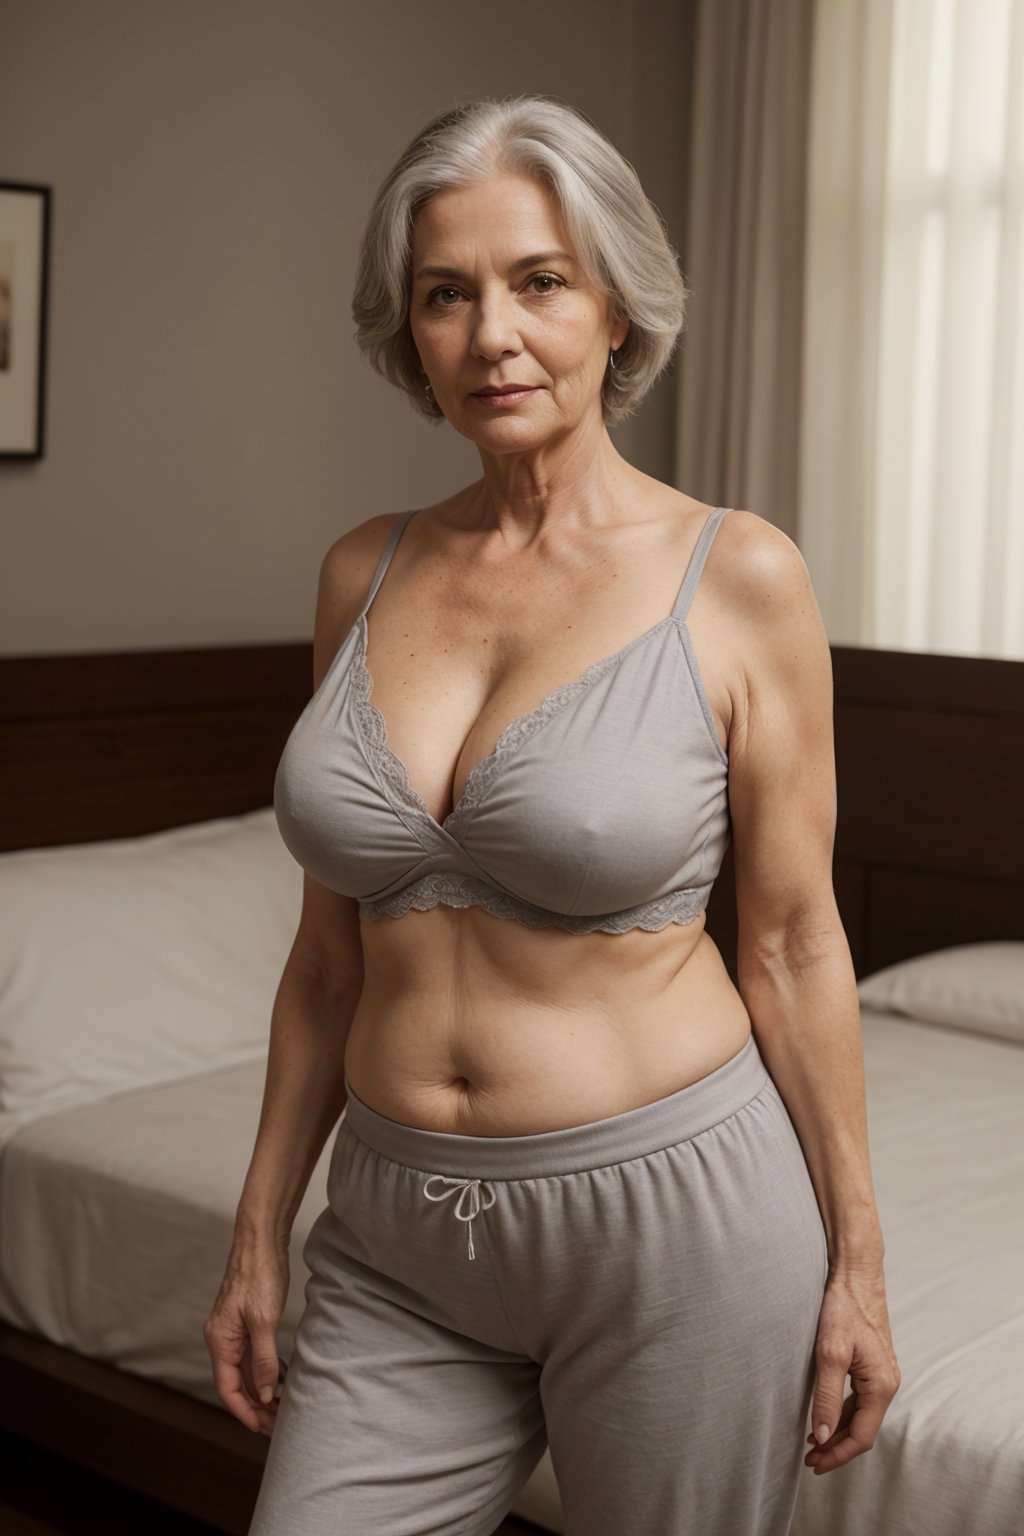 masterpiece, (((older woman in her 40s))), grey hair, wearing nighty, medium saggy breasts, slightly chubby, lateral posture, soft smile, bedroom, standing, seductive_expression, slight cleavage, freckles, full-body_portrait